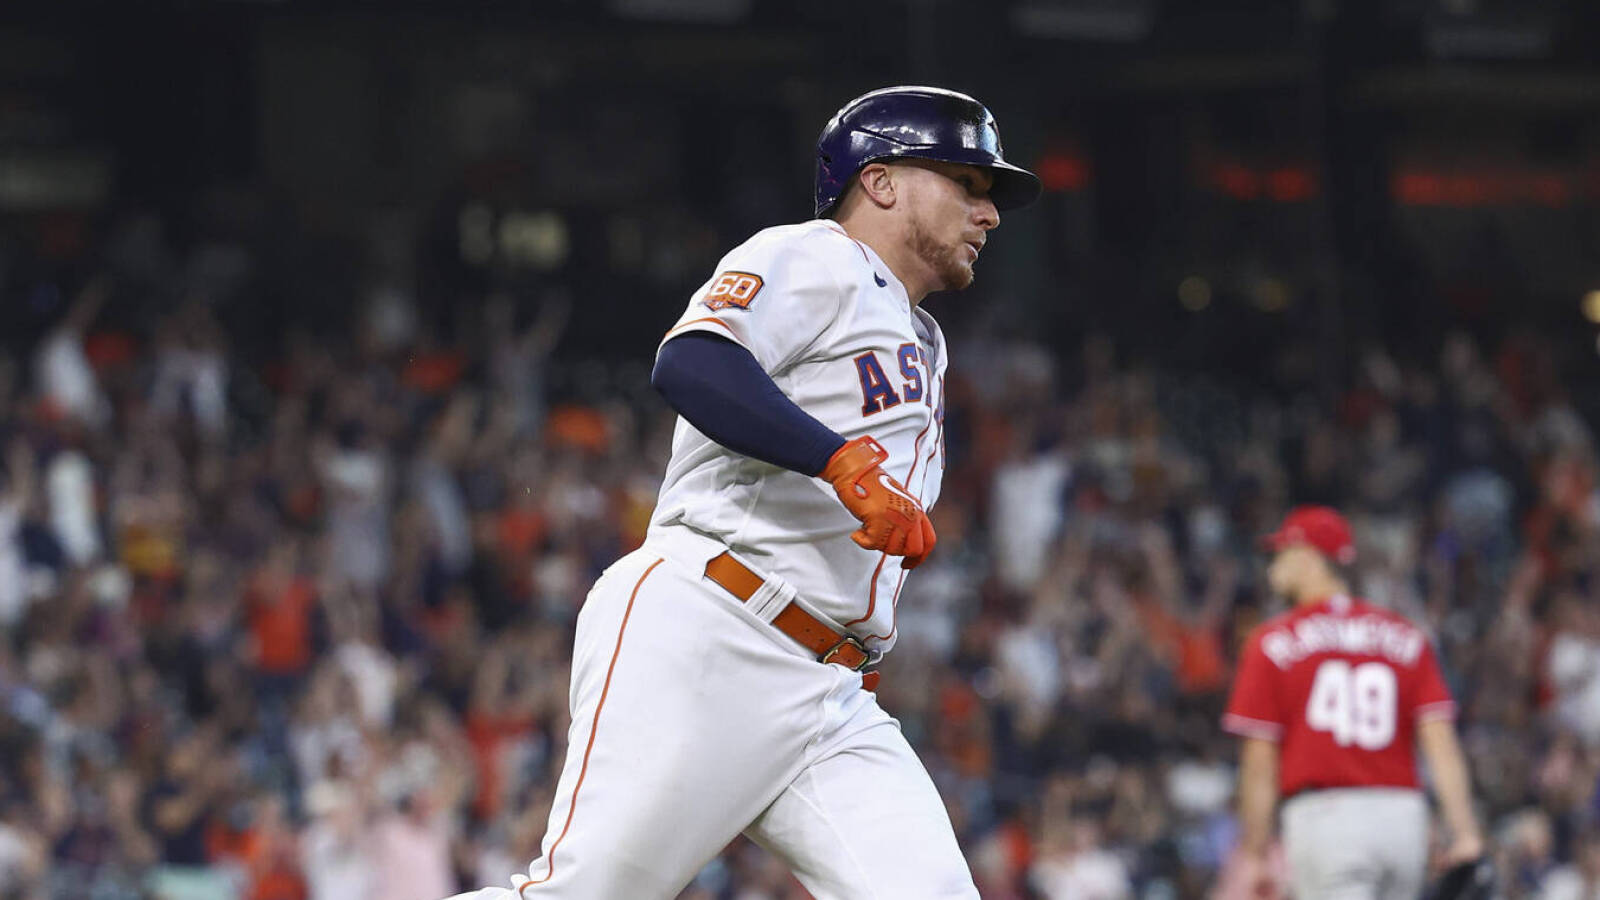 Astros catcher Christian Vazquez eyeing more playing time